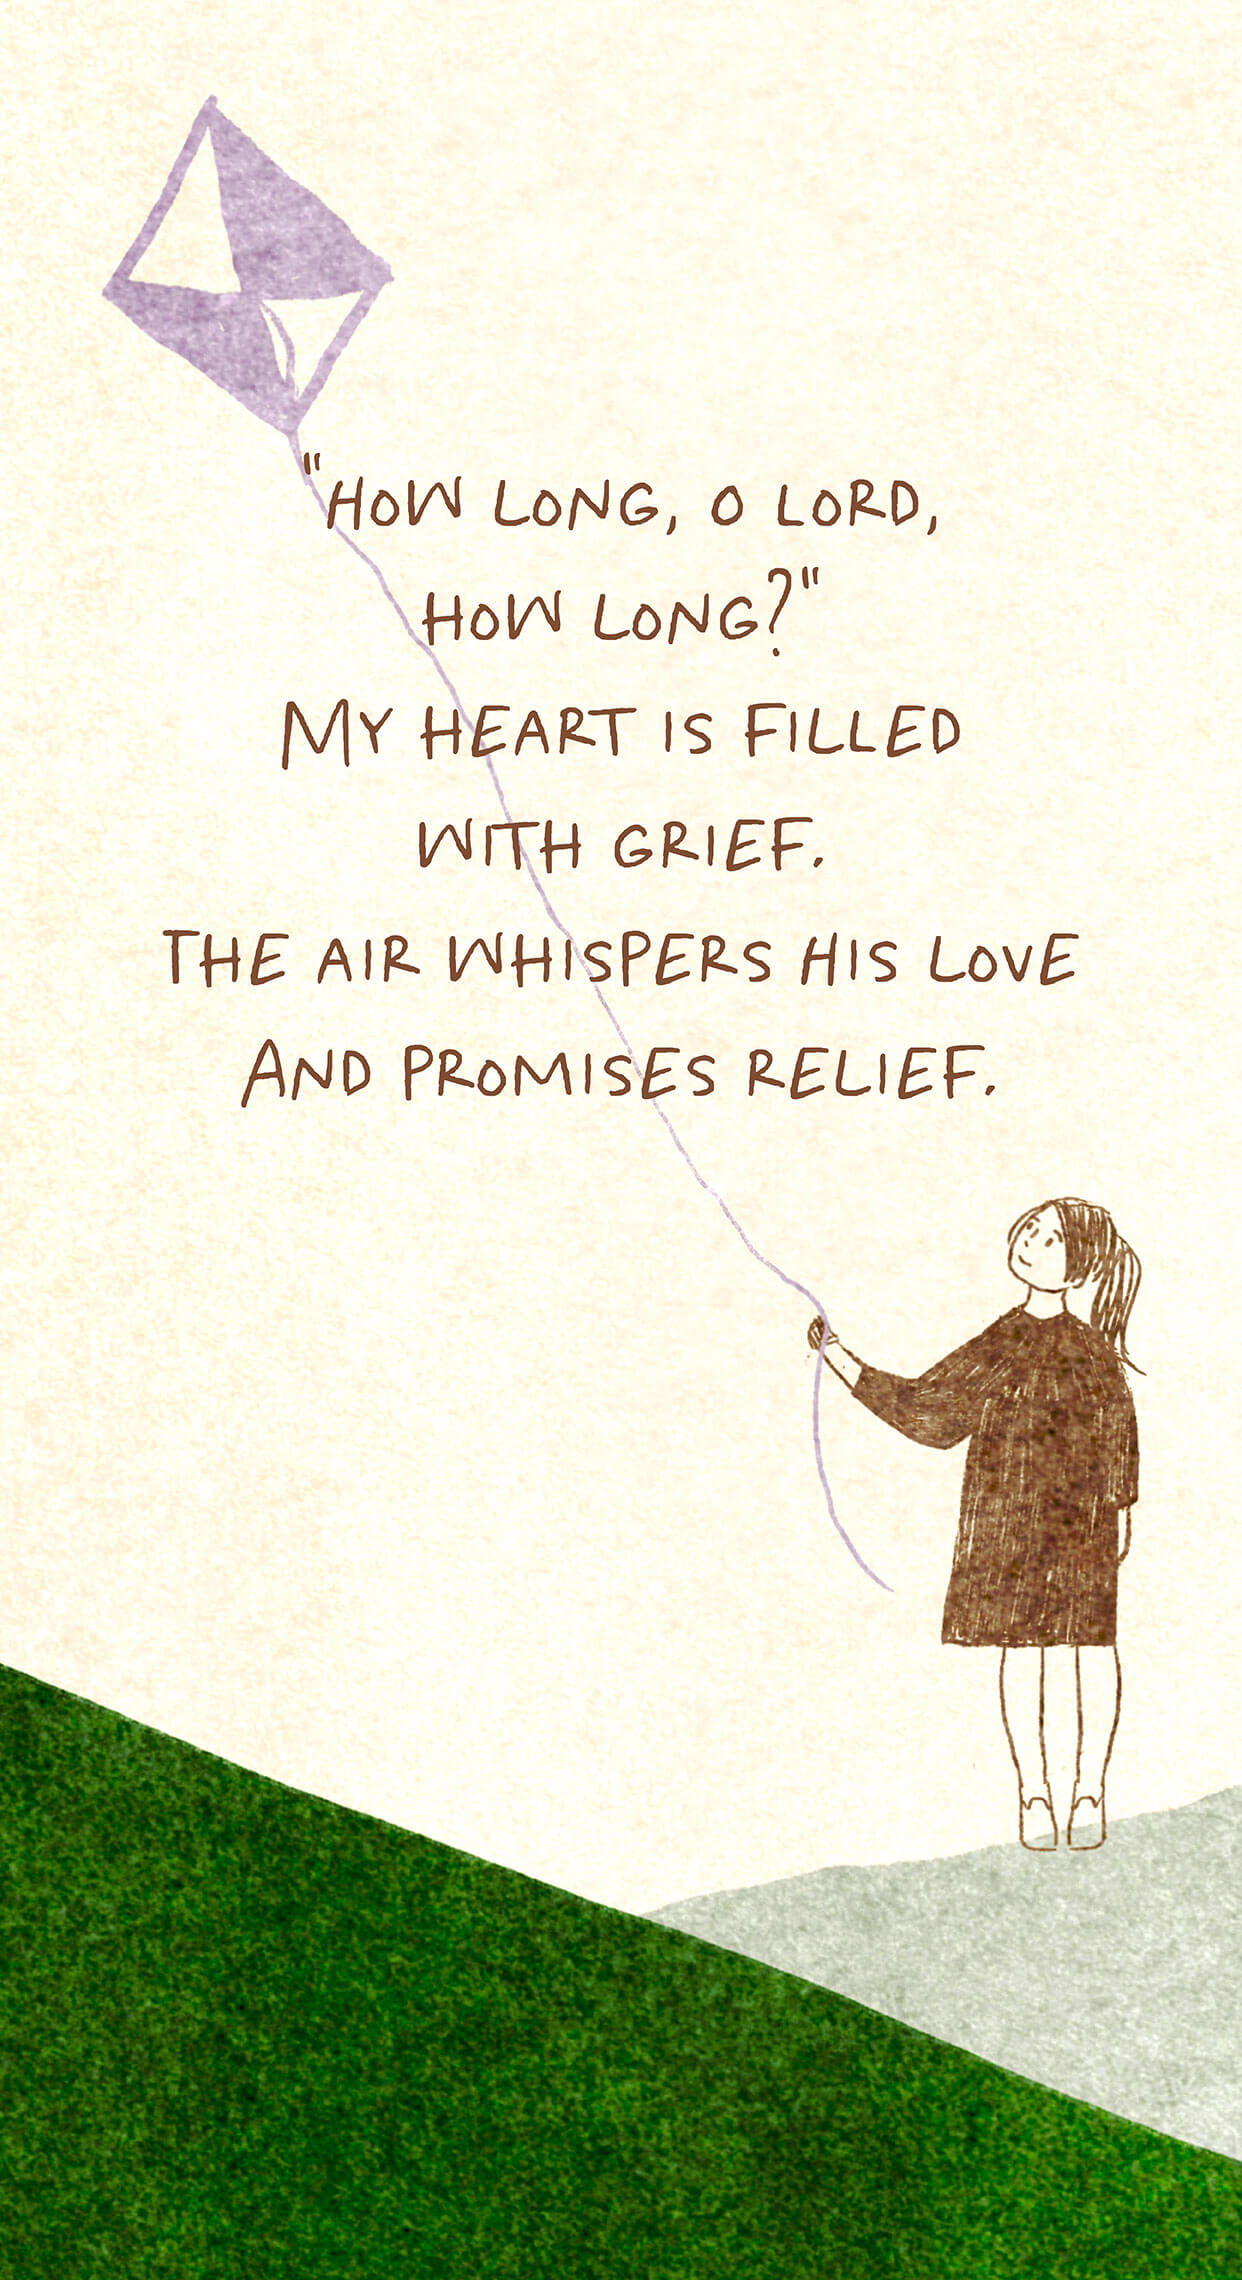 "How long, O Lord, how long?" My heart is filled with grief. The air whisper His love and promises relief.